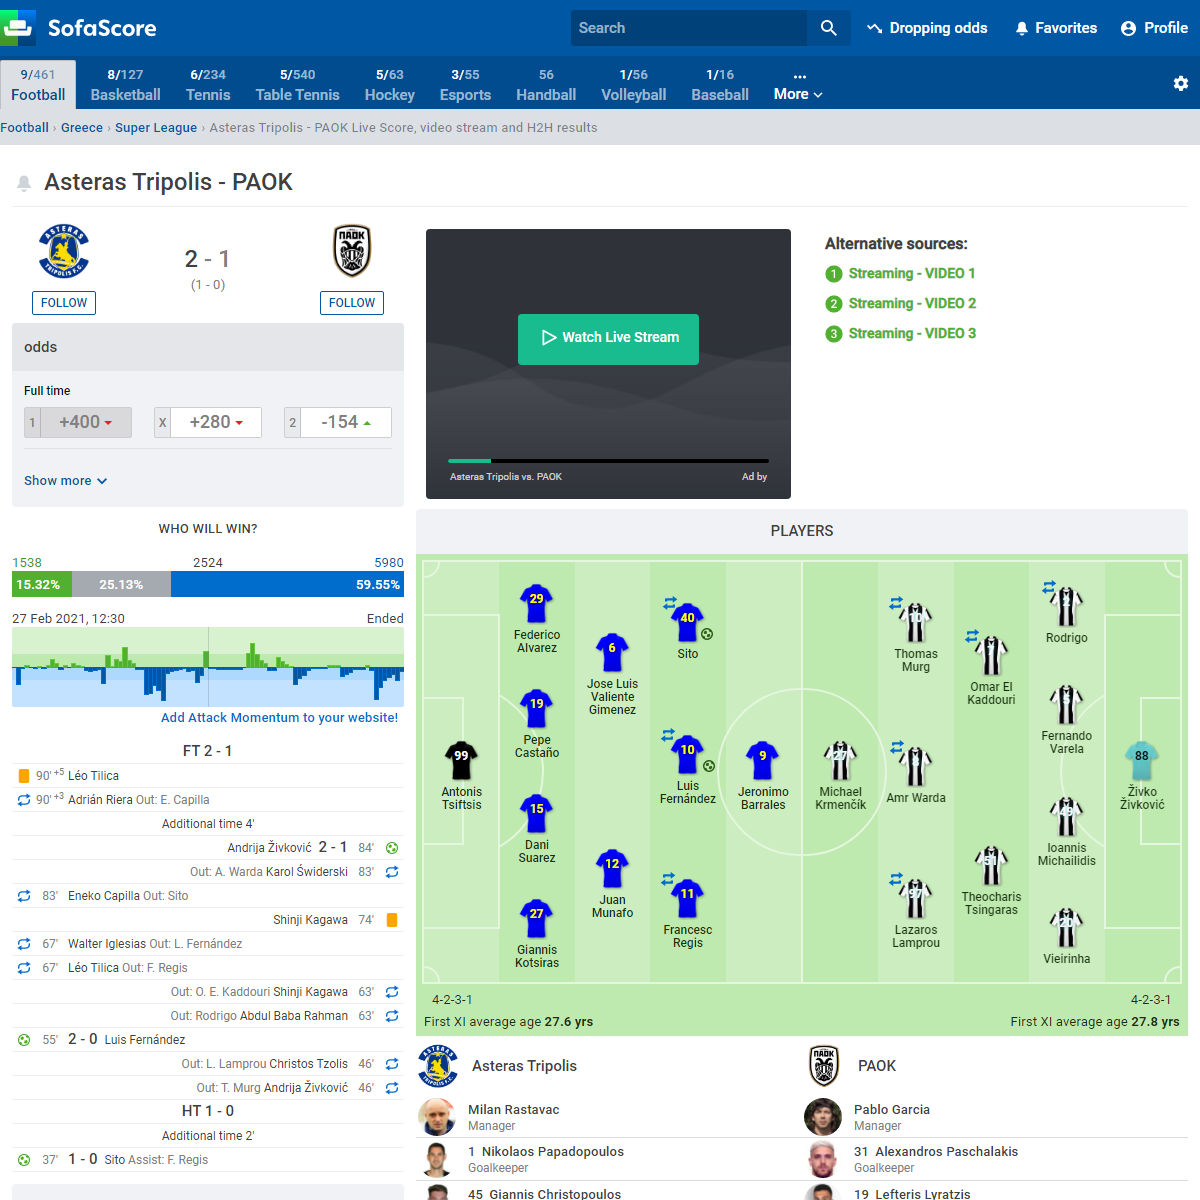 A complete backup of https://www.sofascore.com/asteras-tripolis-paok/bpbsRBc